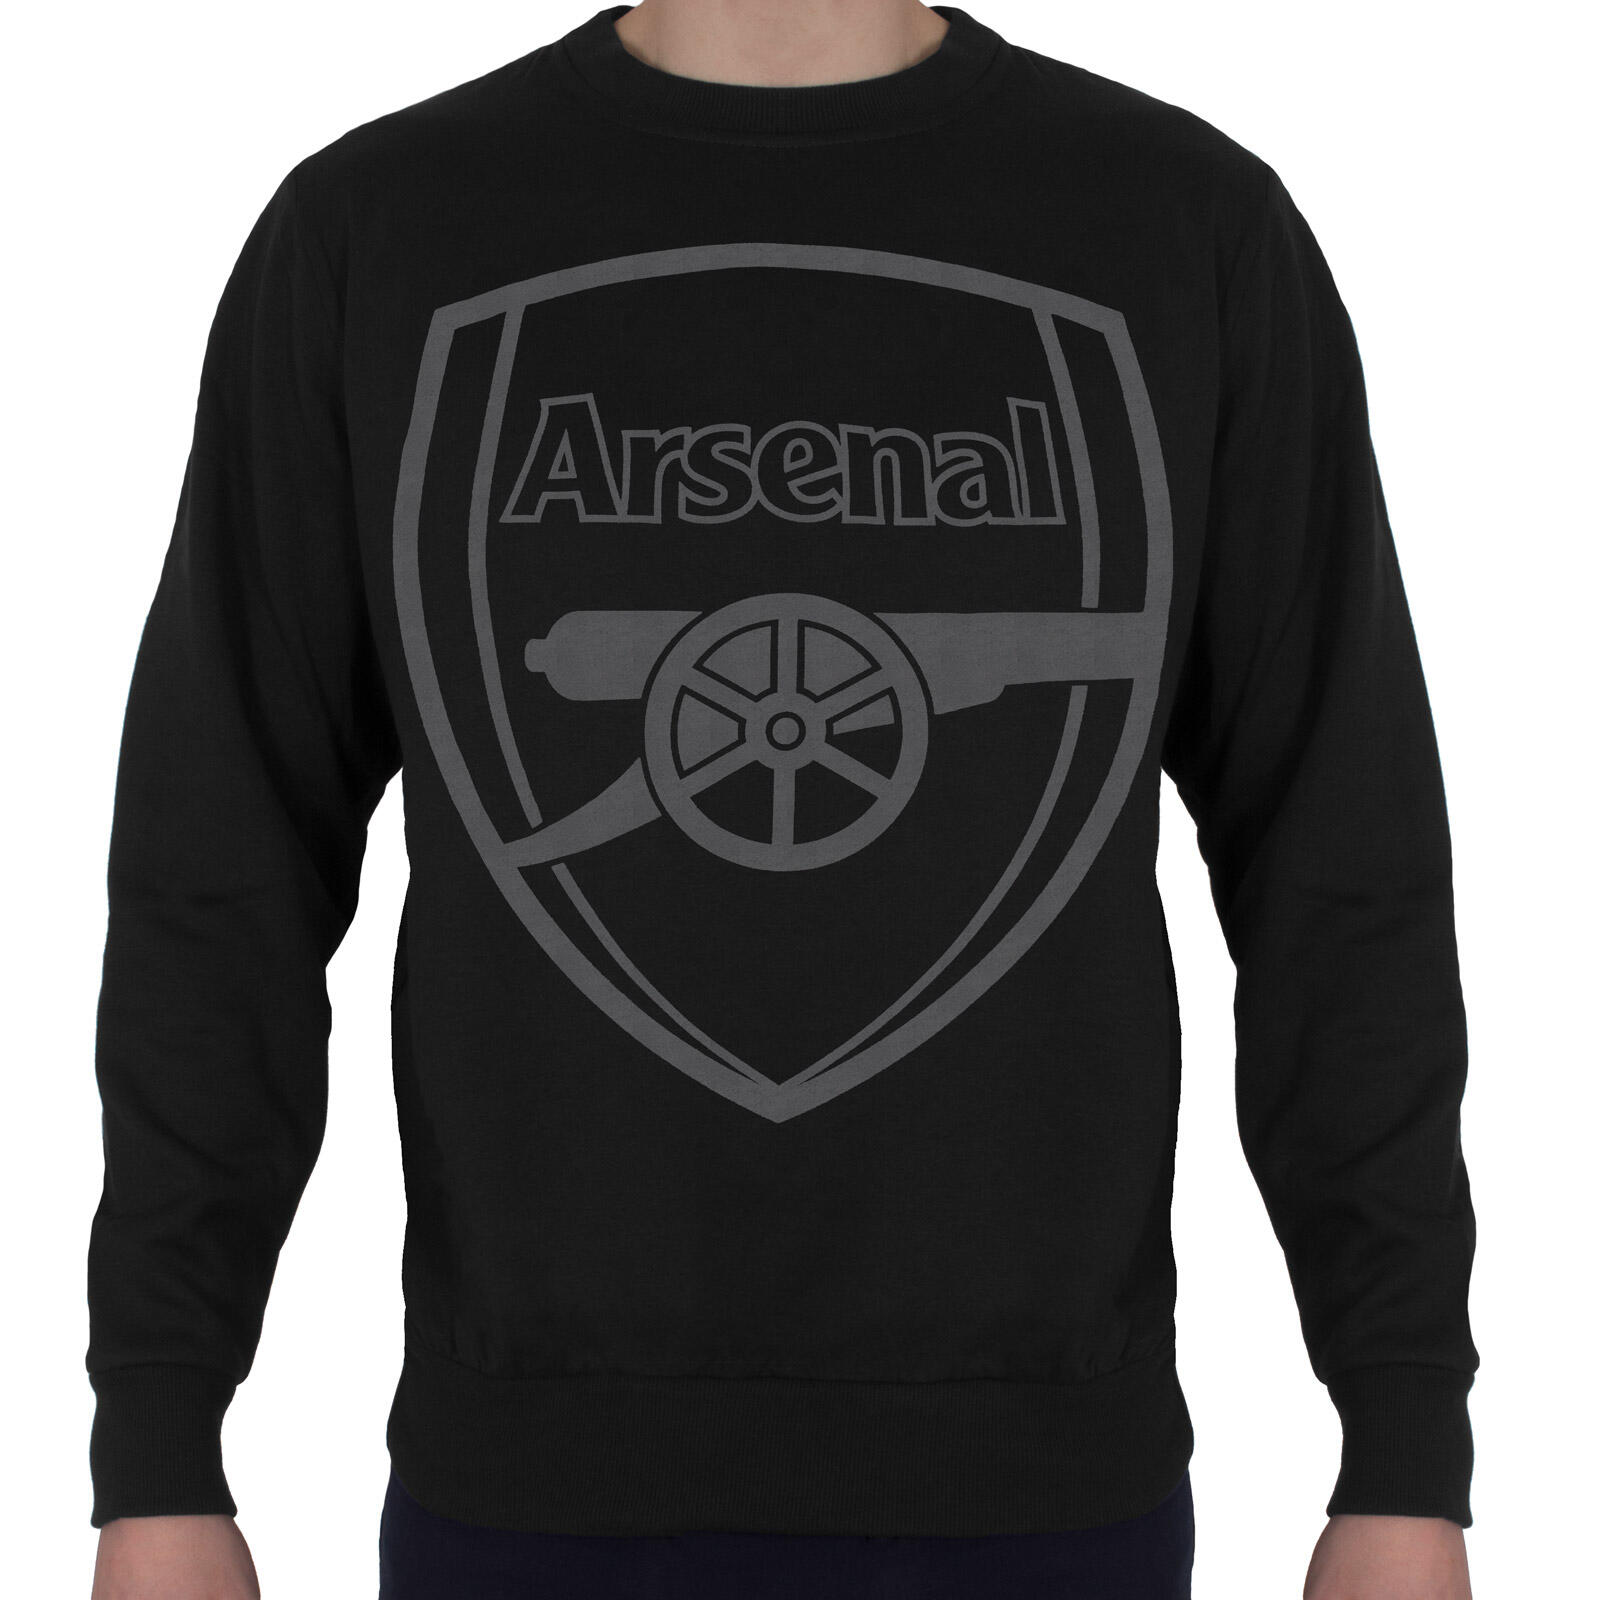 Arsenal FC Mens Sweatshirt Graphic Top OFFICIAL Football Gift 1/3